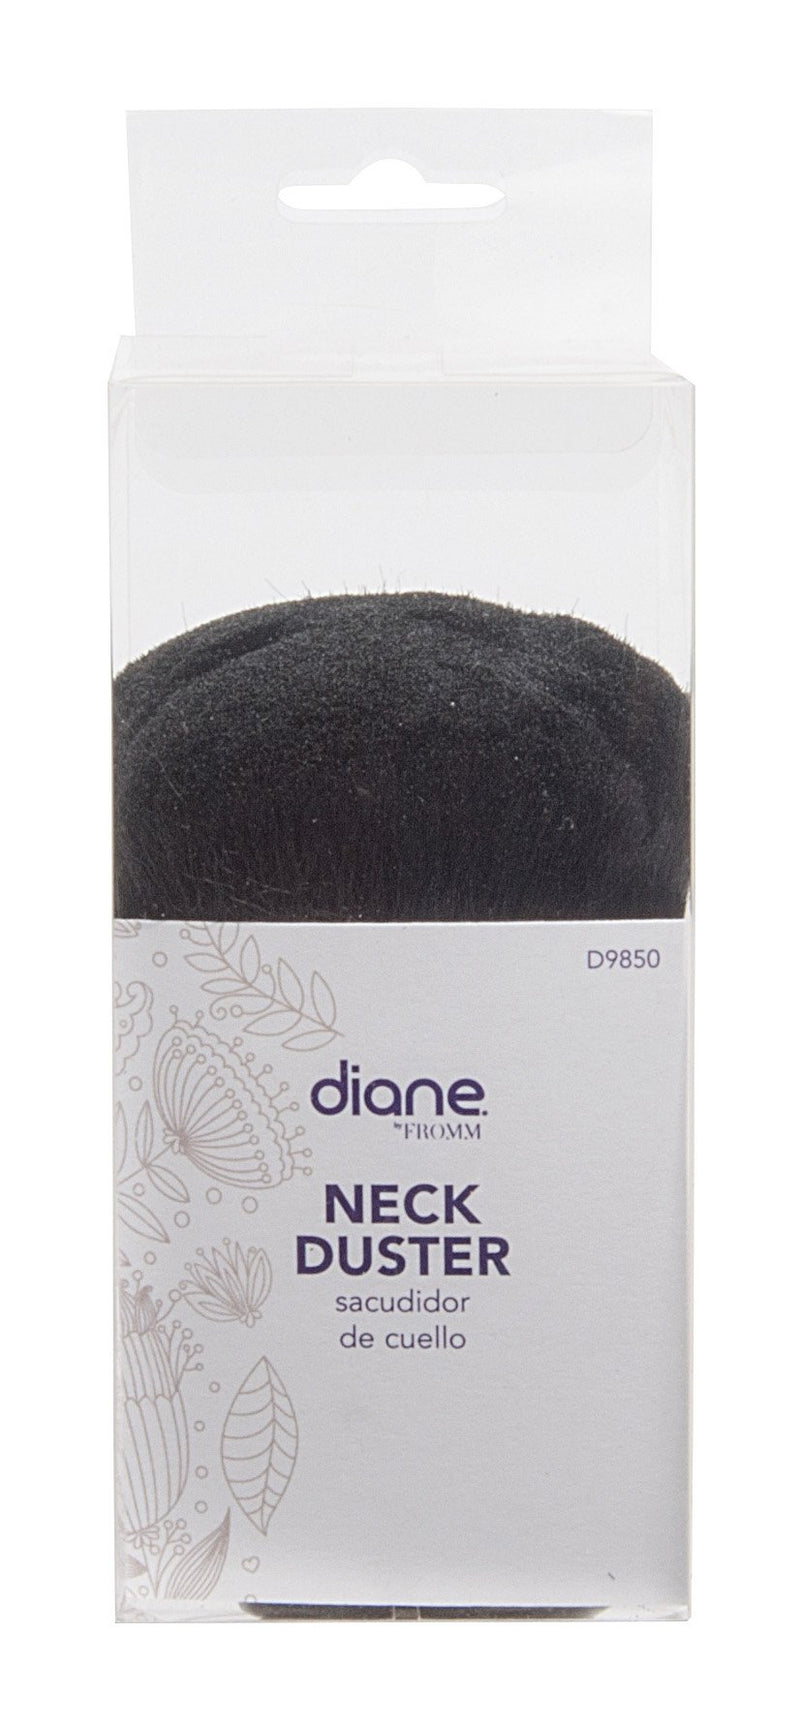 Diane Neck Duster – Barber and Salon Brush to Remove Loose Hair from Neckline and Ears After Haircut, Professional and Home Use, Soft Nylon Bristles, Stand Up Base, 5”, Medium, D9850 Medium (Pack of 1)